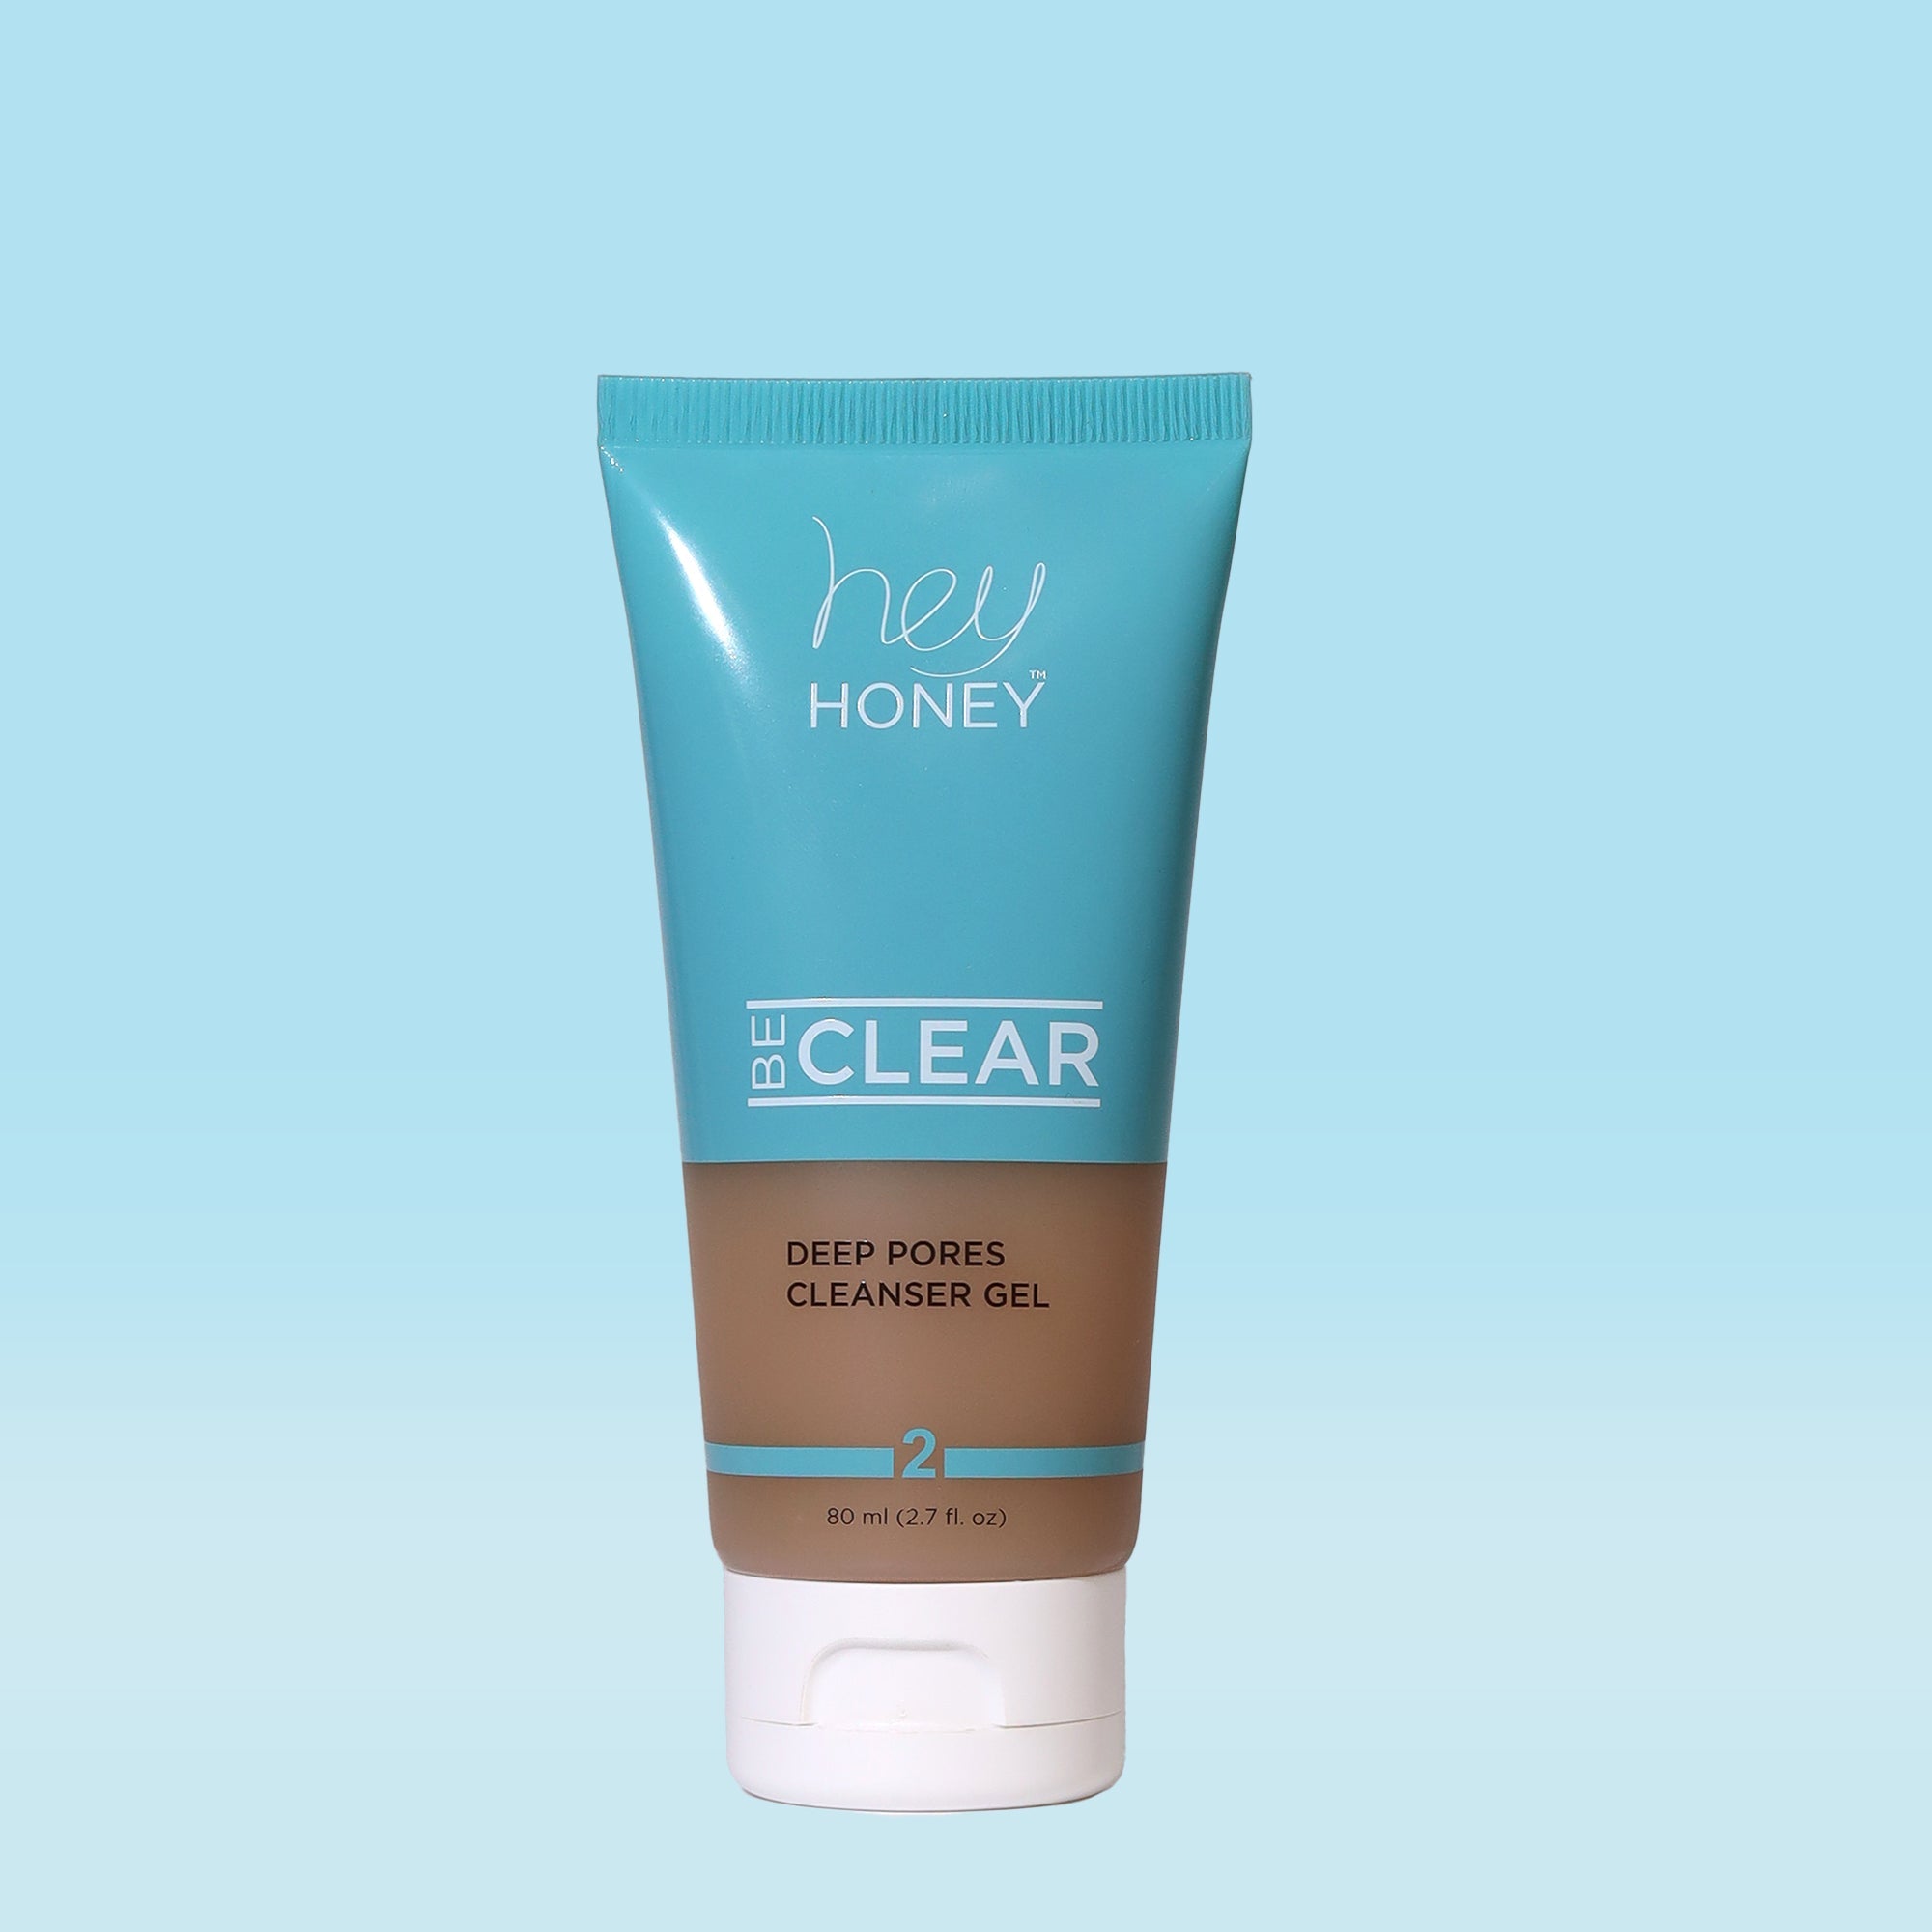 BE CLEAR : 3 STEP ACNE CONTROL ROUTINE + FREE BAG - Hey Honey Beauty